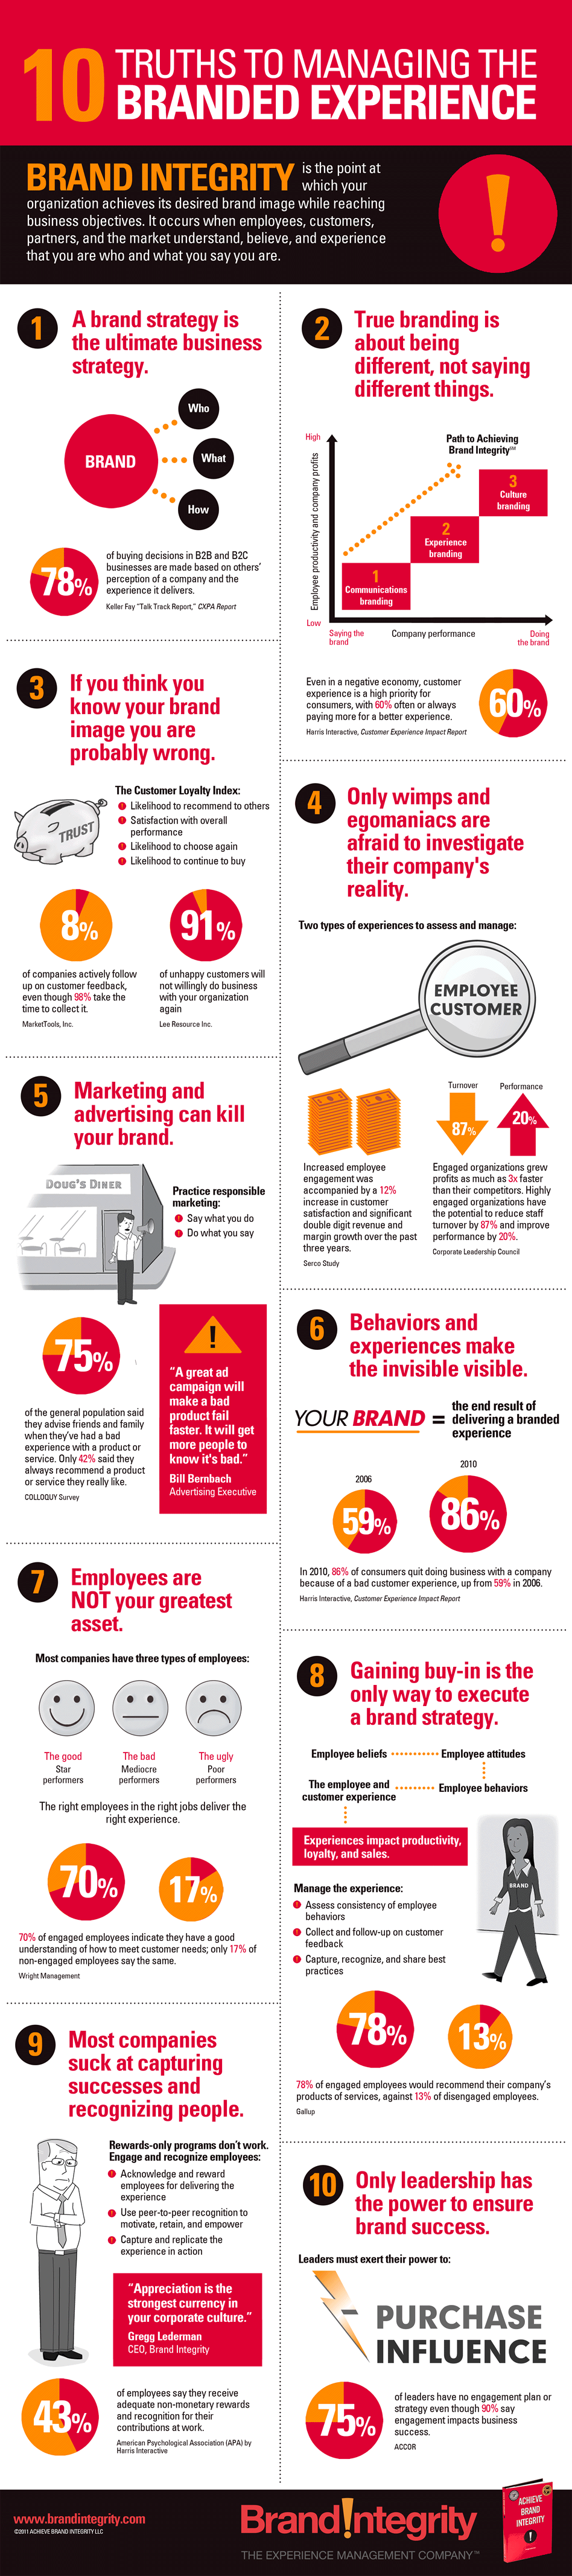 Ten Truths to Managing the Branded Experience Infographic